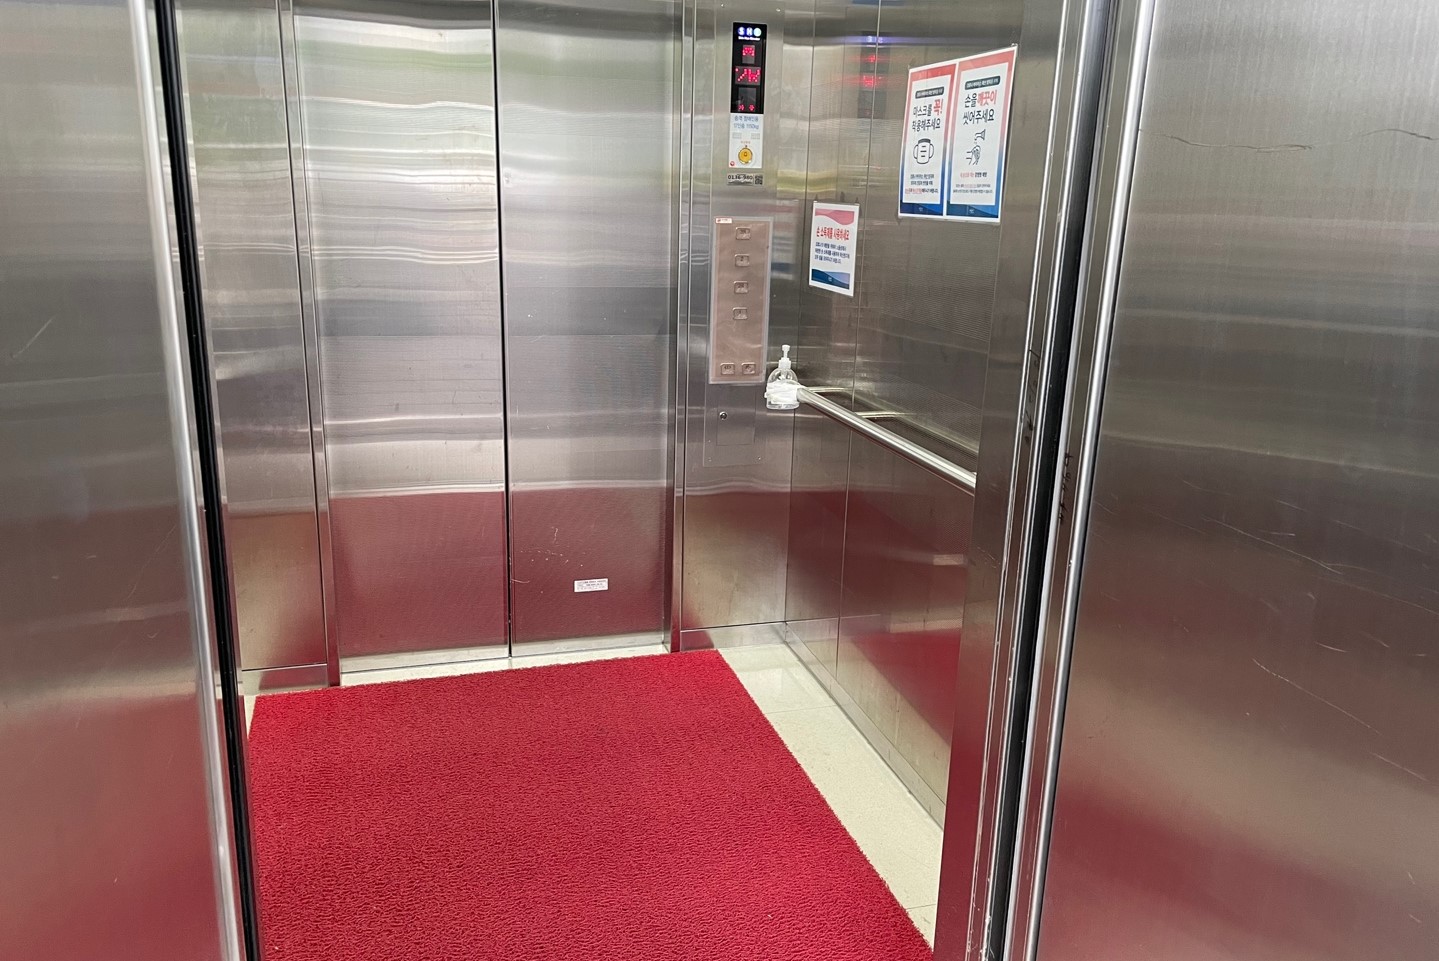 Elevator0 : Interior view of the elevator which wheelchair users can use conveniently